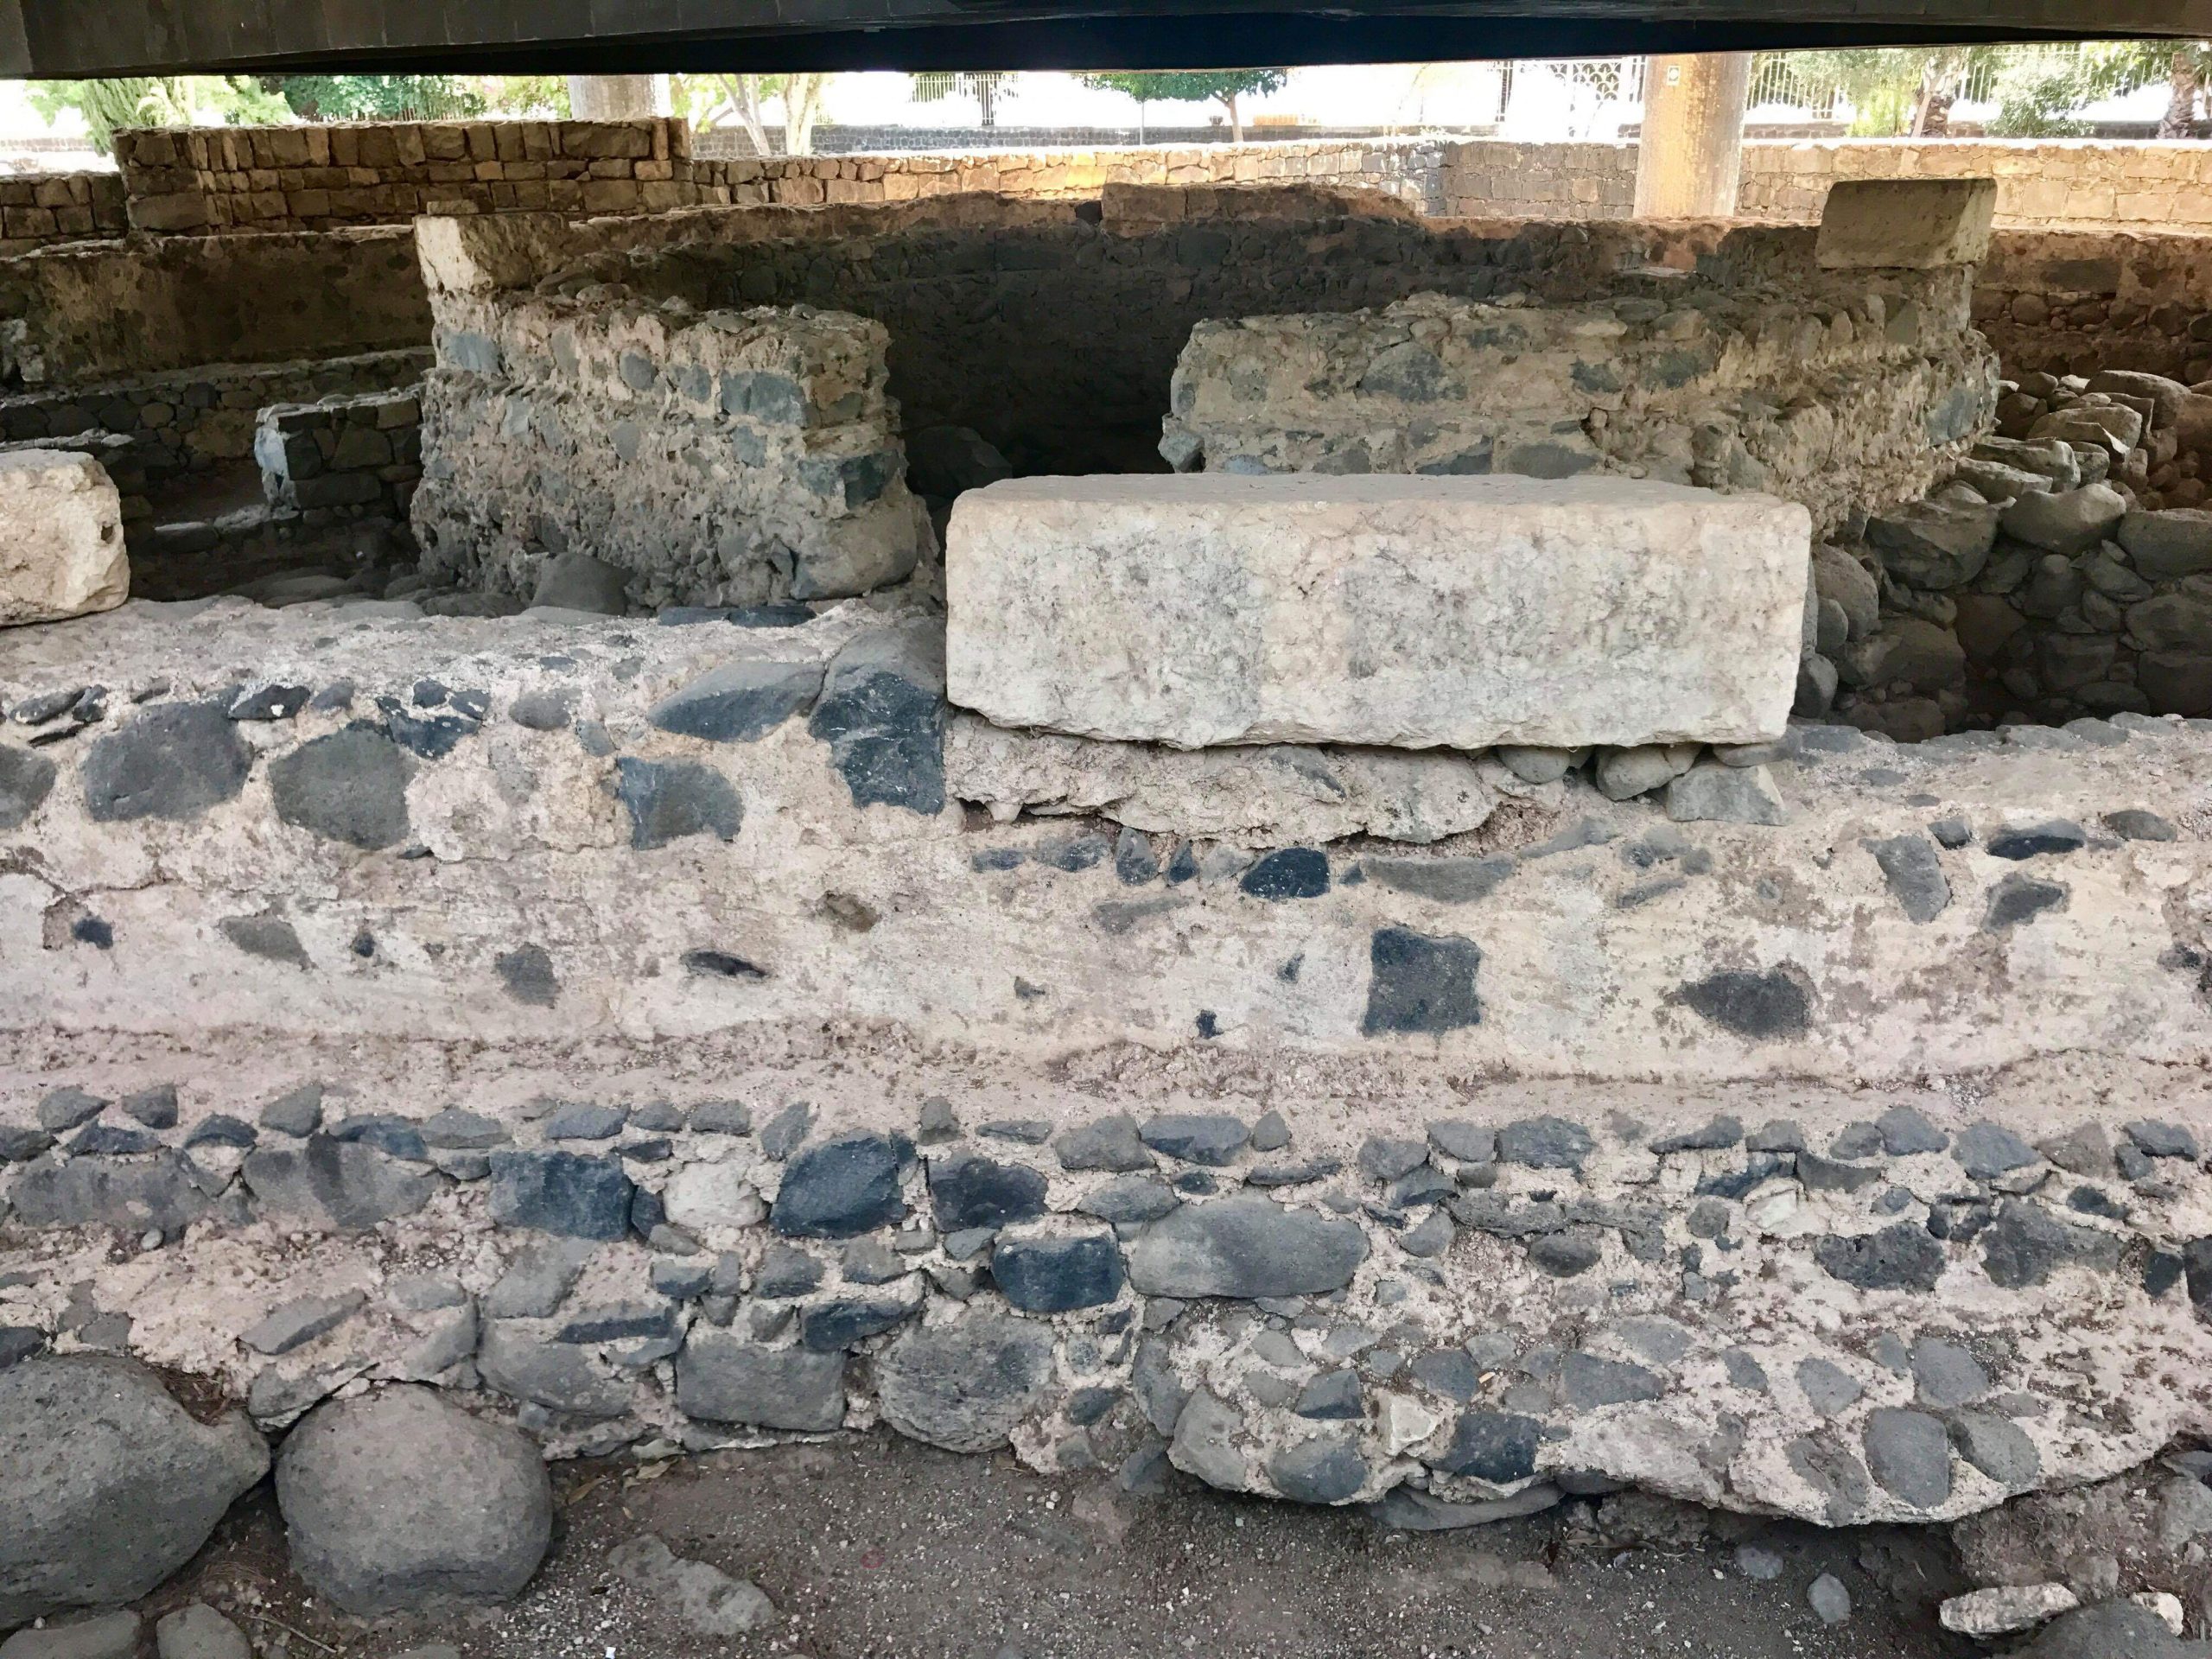 Site of the house where Jesus lived